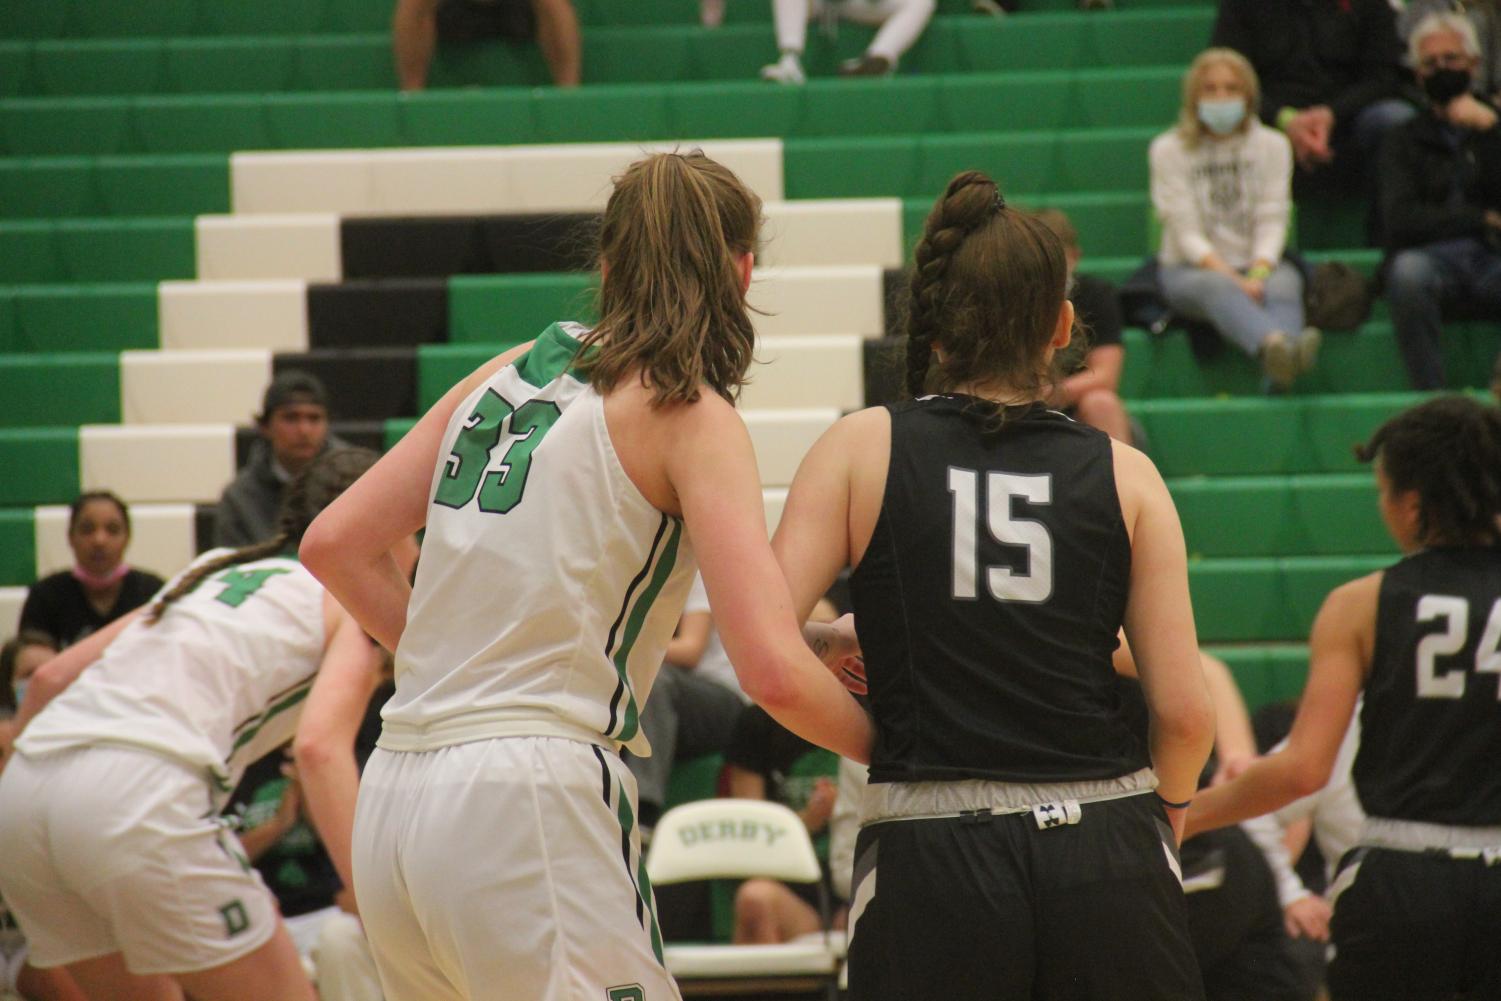 Girls+Basketball+Sub-State+Semifinals+Vs.+Campus+%28Photos+by+Natalie+Wilson%29